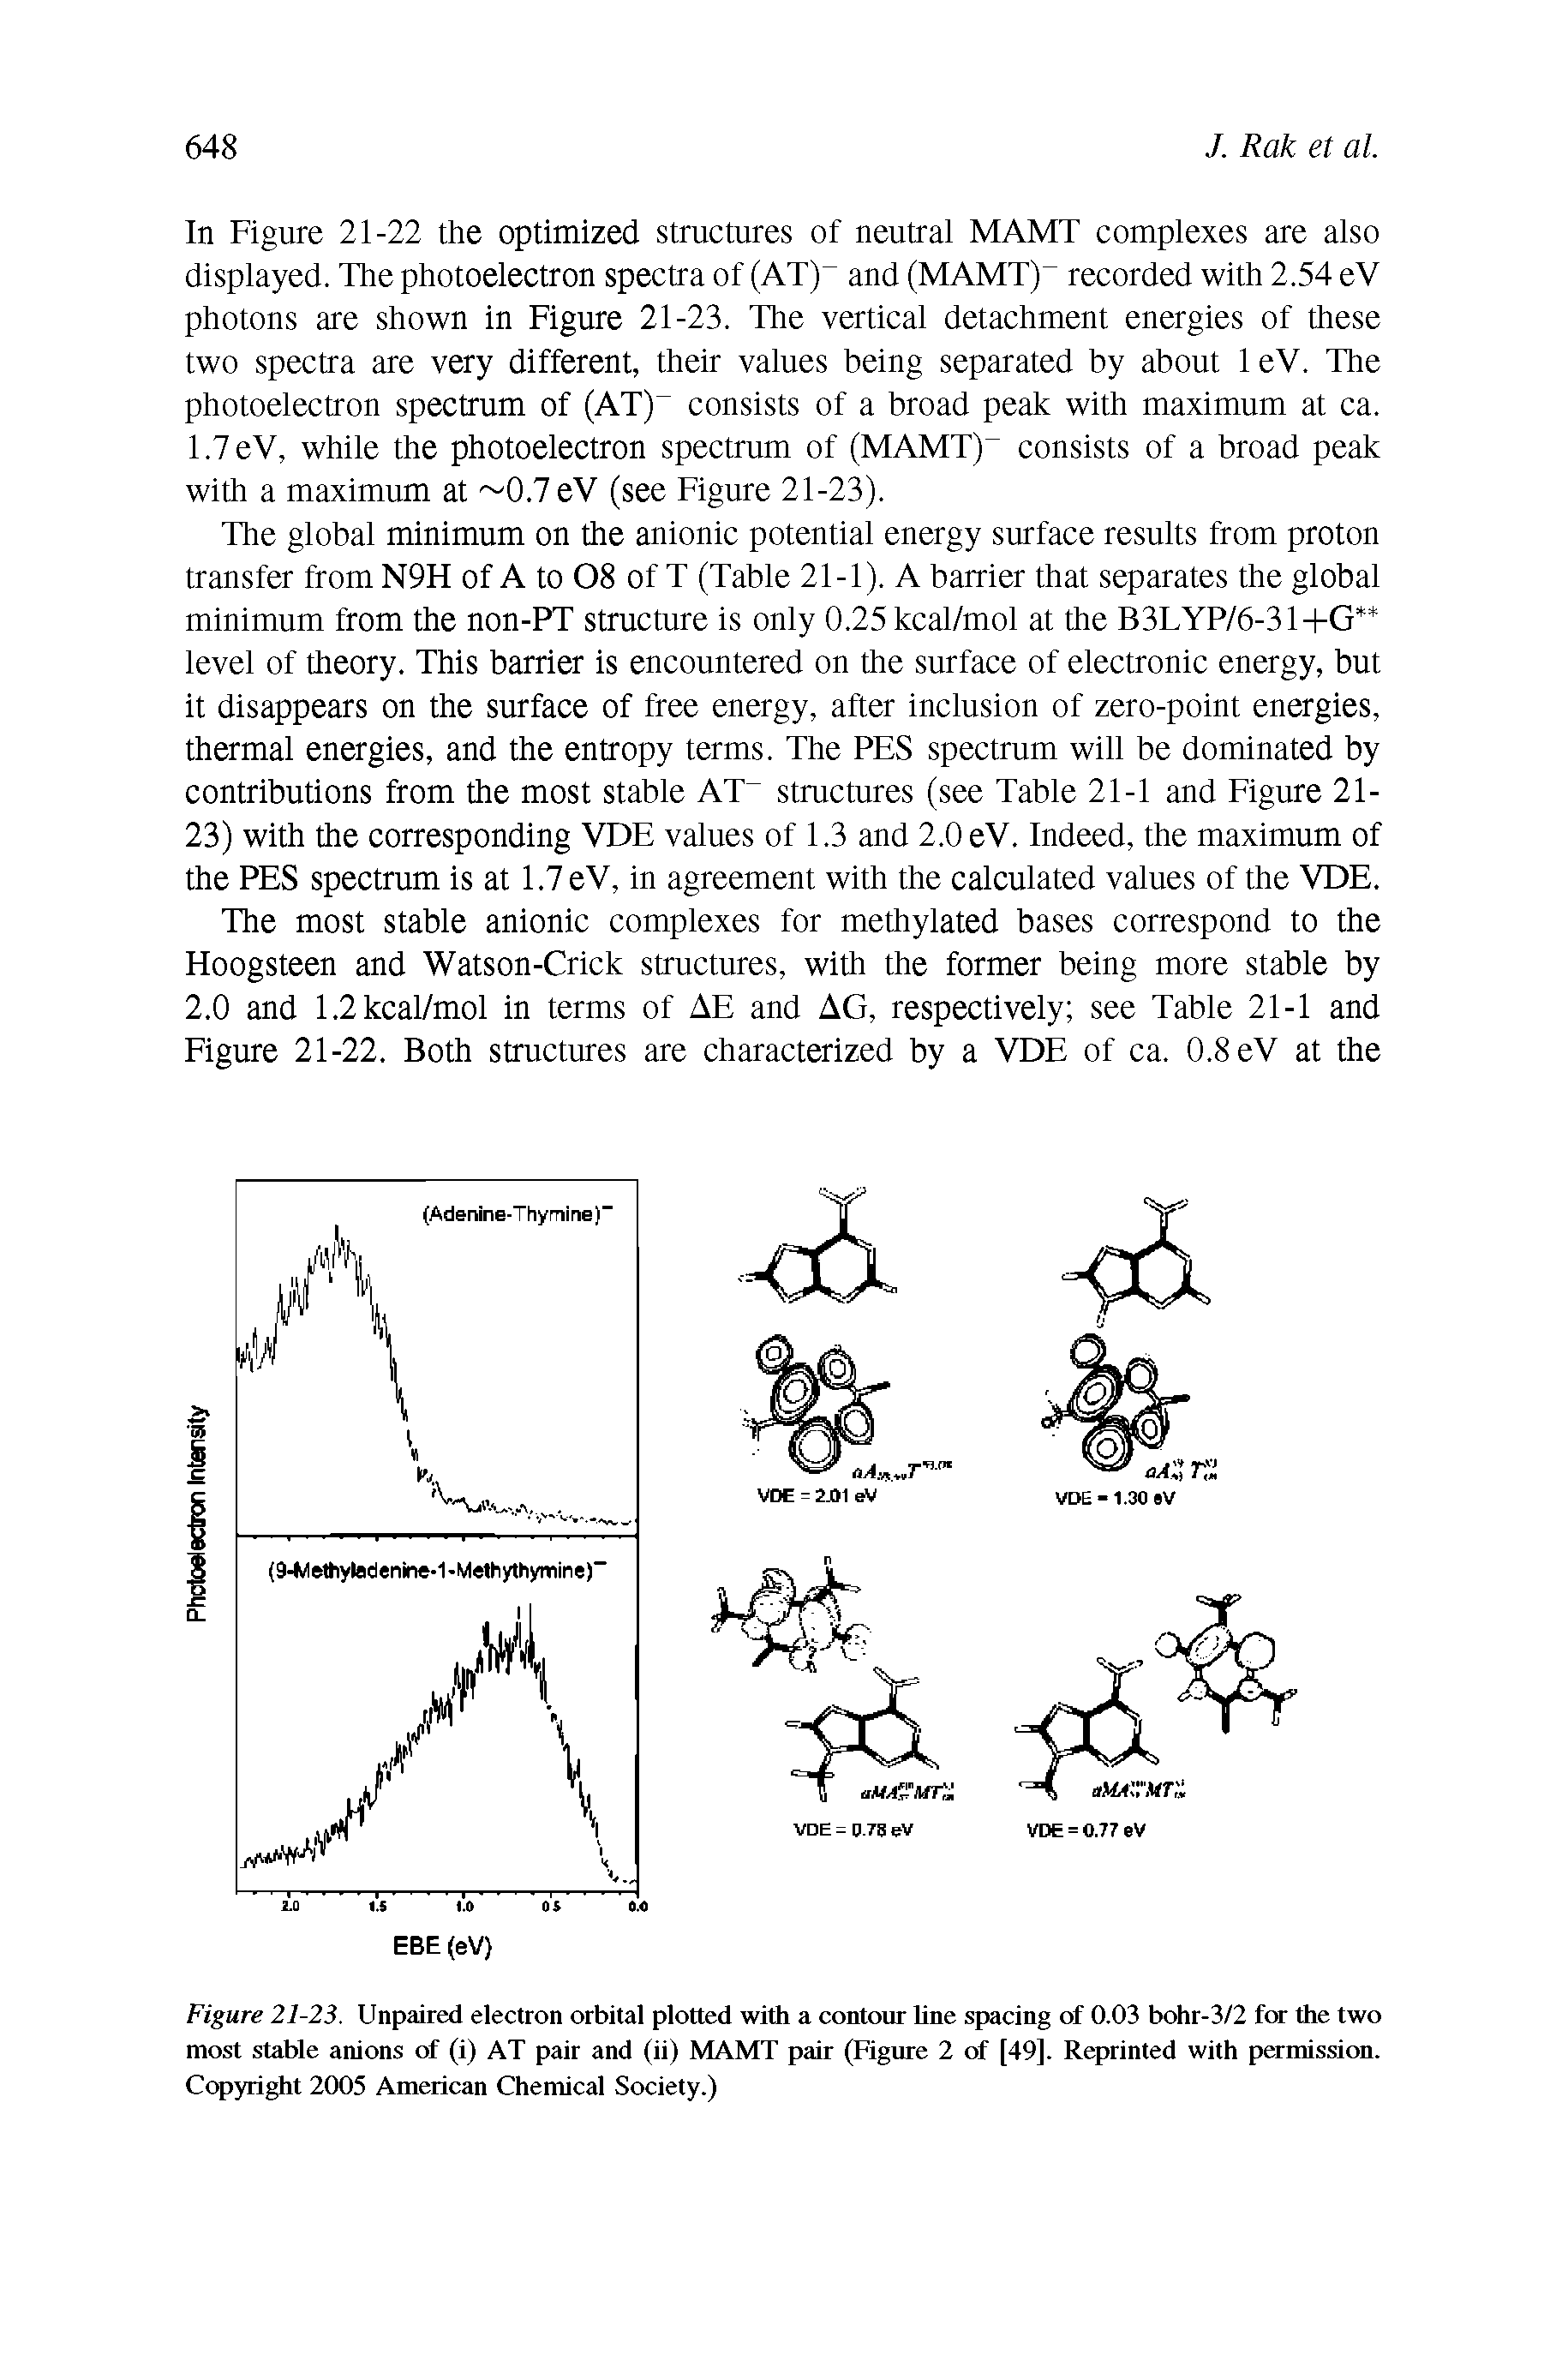 Figure 21-23. Unpaired electron orbital plotted with a contour line spacing of 0.03 bohr-3/2 for the two most stable anions of (i) AT pair and (ii) MAMT pair (Figure 2 of [49]. Reprinted with permission. Copyright 2005 American Chemical Society.)...